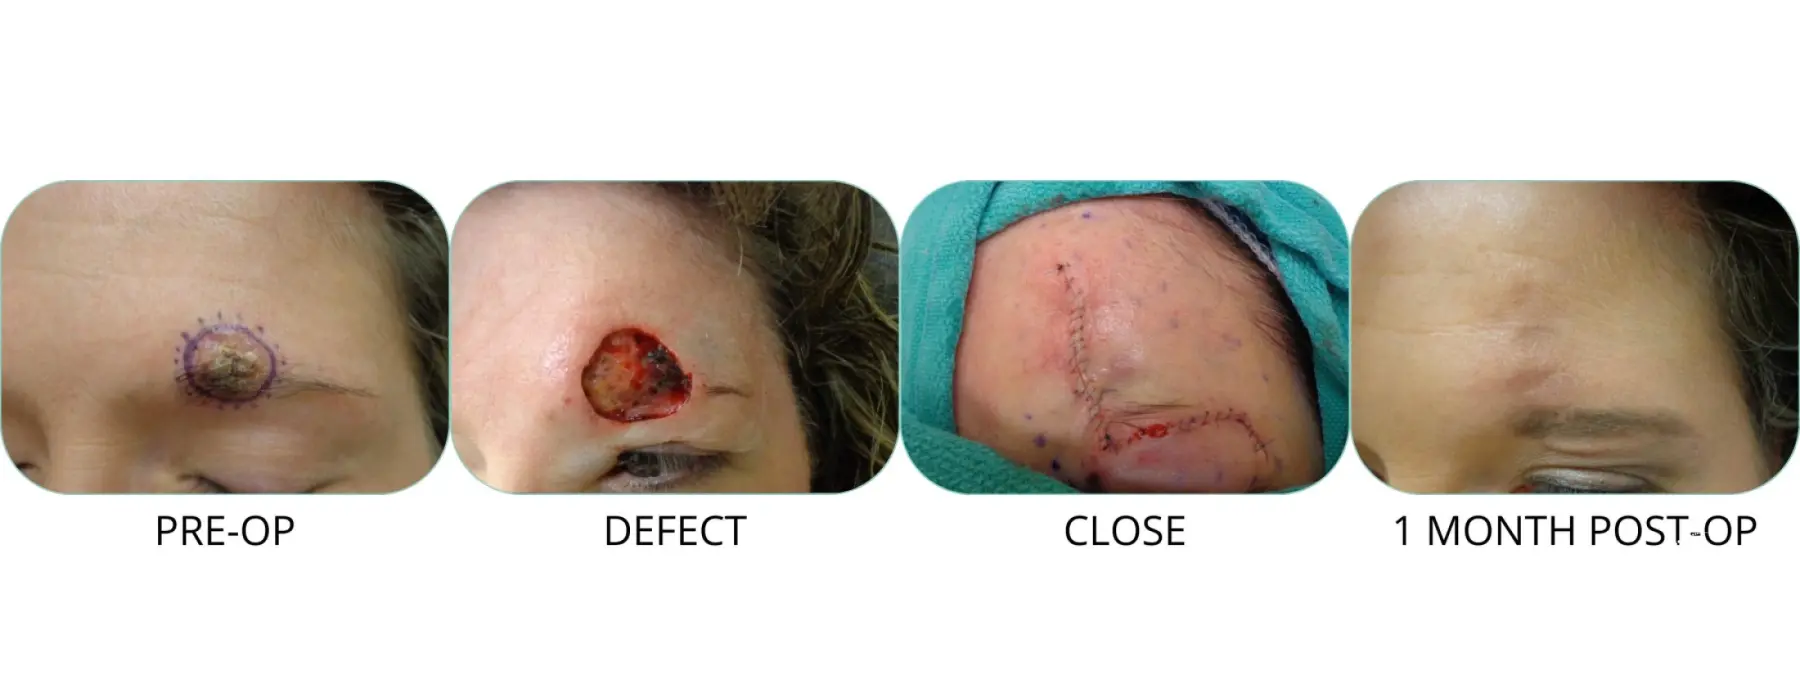 Basal Cell skin cancer, forehead near eyebrow - Mohs surgery - Before and After 1